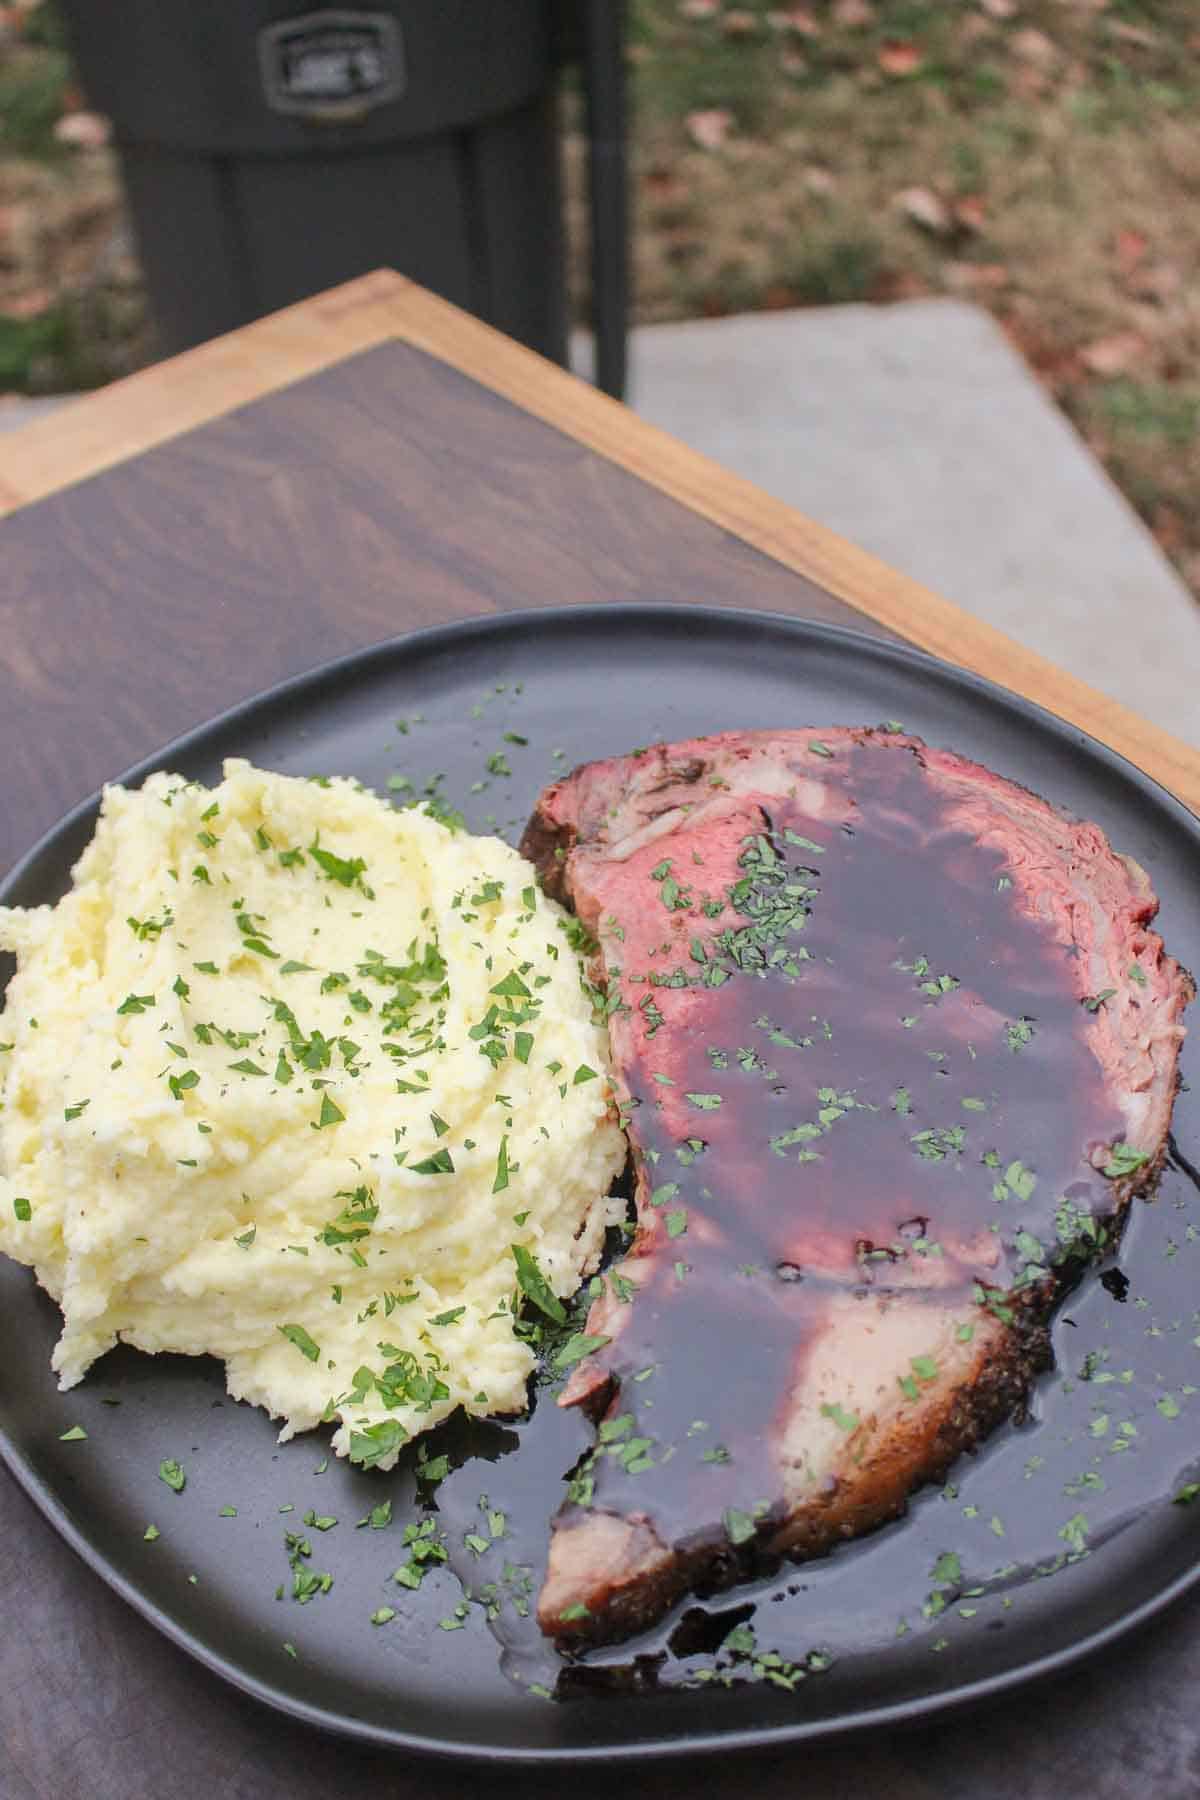 The juicy prime rib is served with mashed potatoes and a red wine sauce, and sprinkled with fresh chopped parsley. 